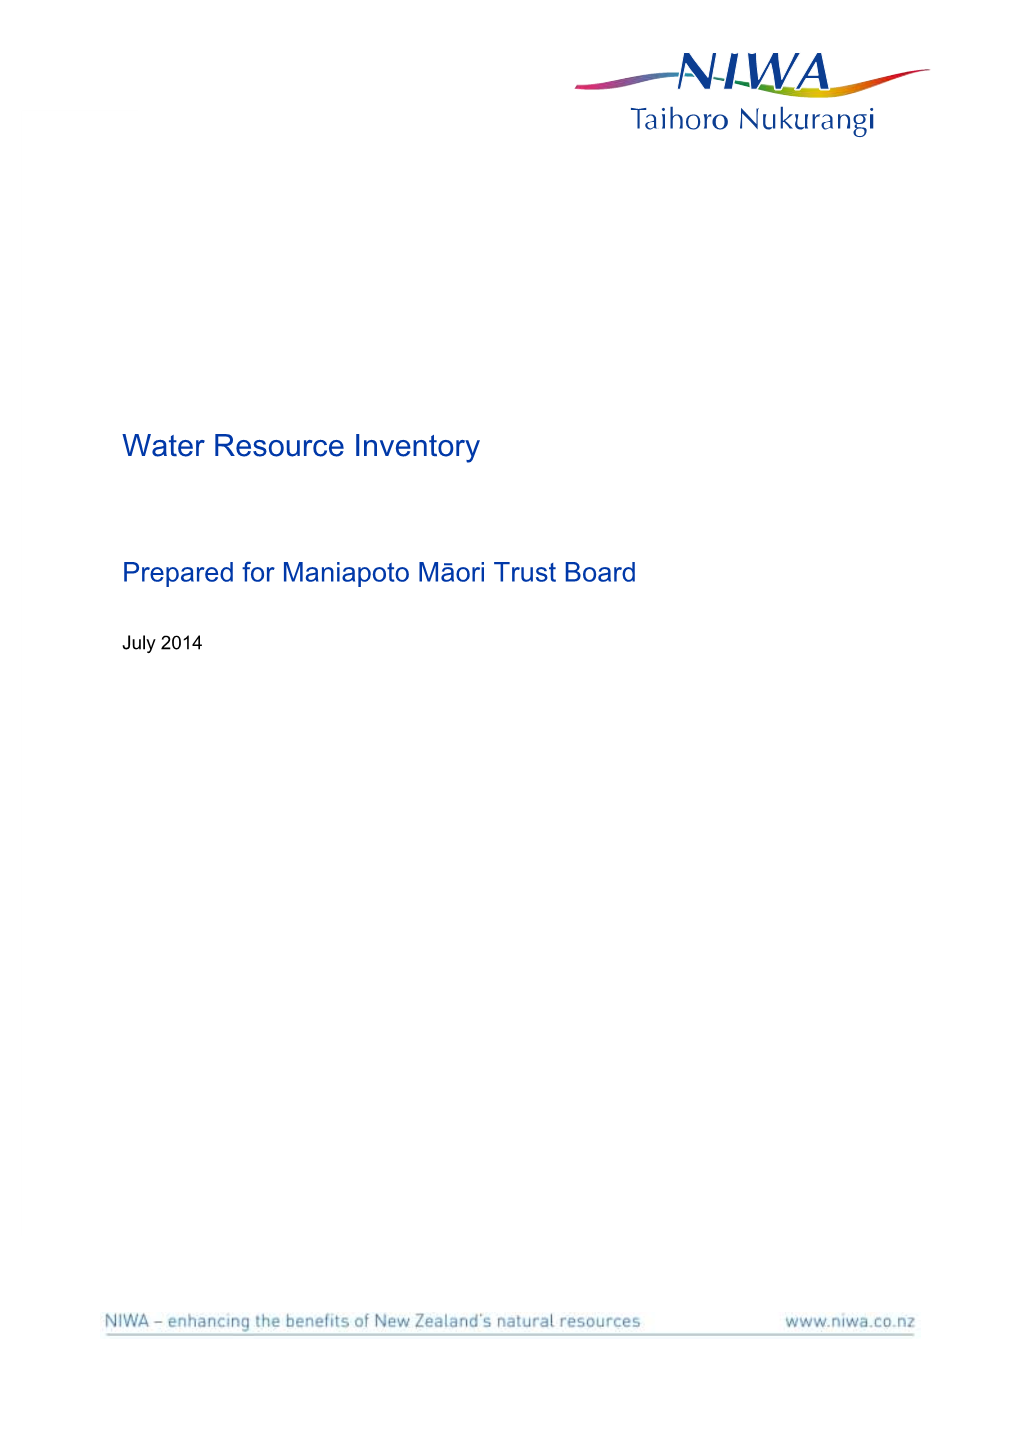 6. Water Resource Inventory